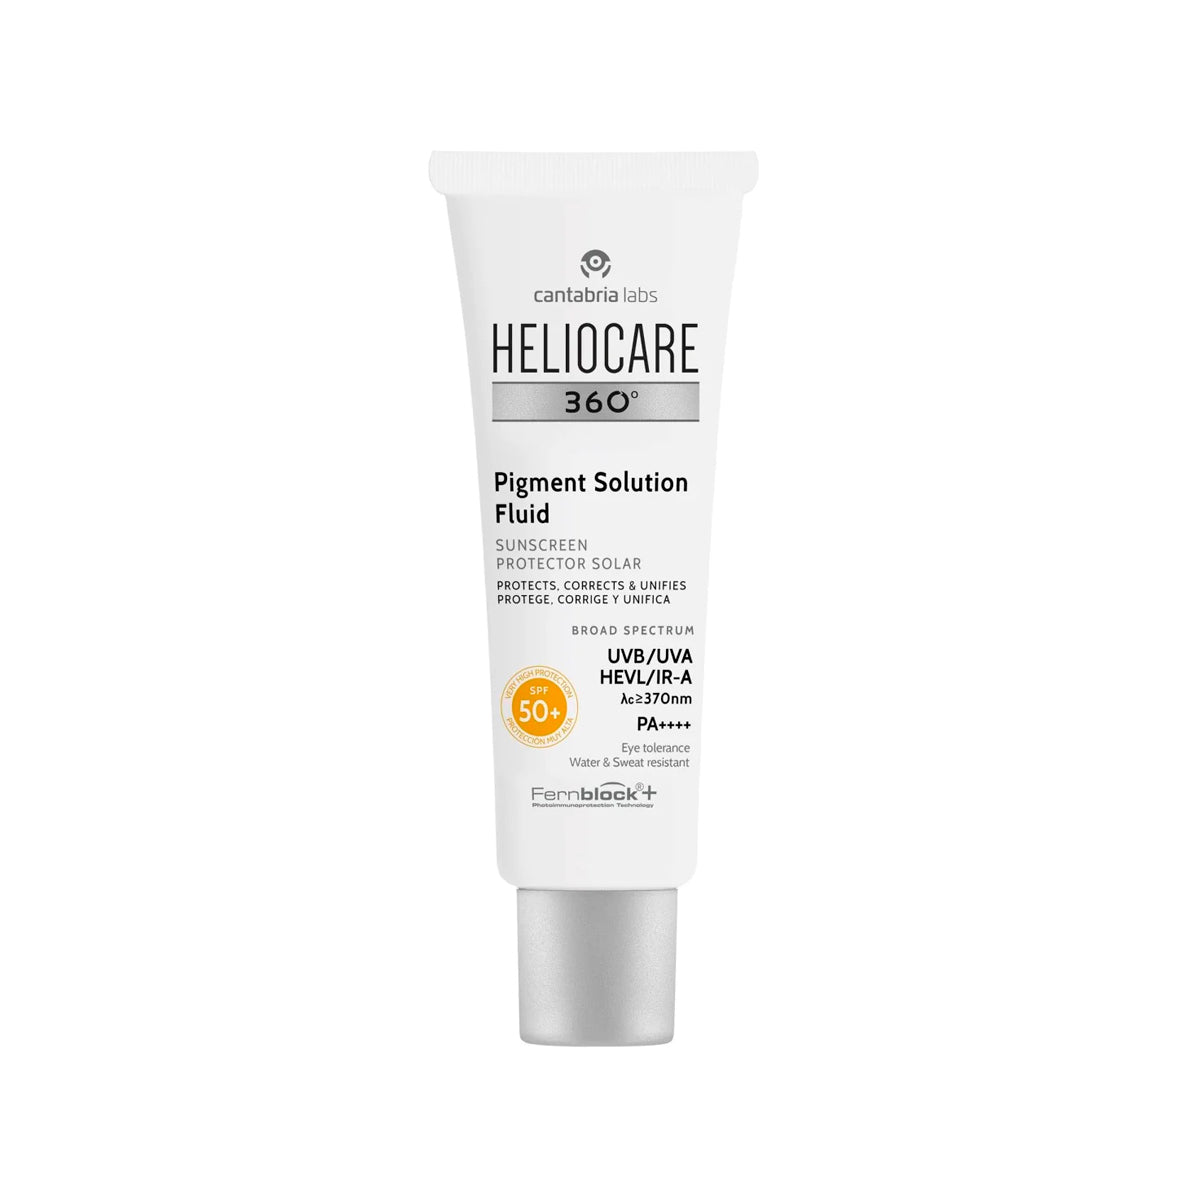 Heliocare 360 Pigment Solution Fluid SPF 50 50ml Cantabria Labs